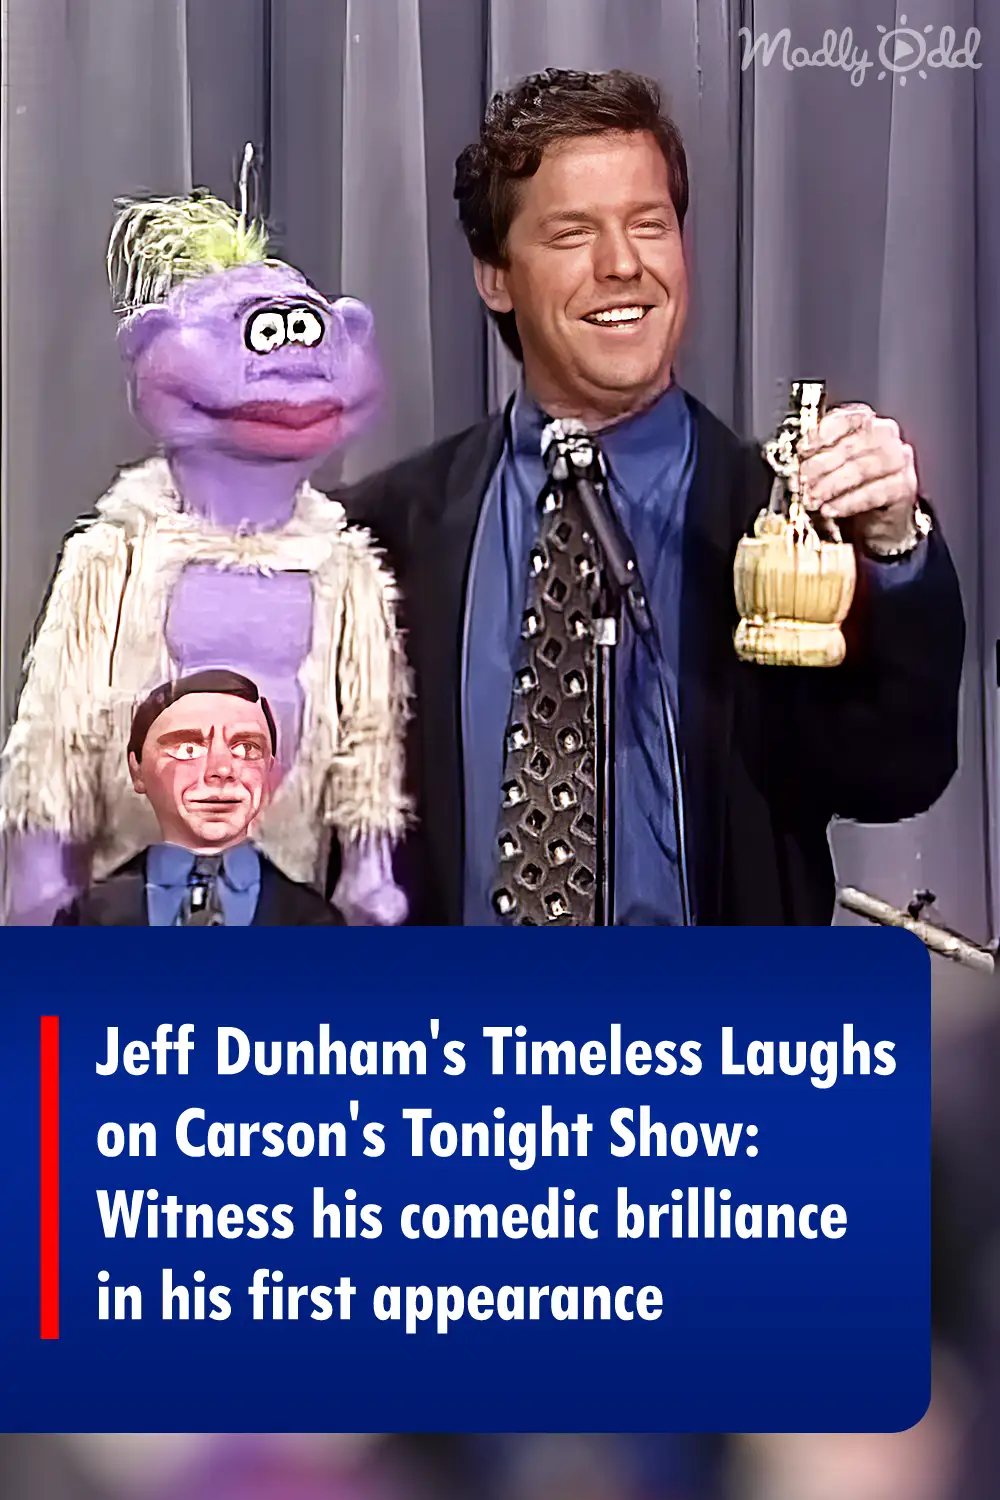 Jeff Dunham's Timeless Laughs on Carson's Tonight Show: Witness his comedic brilliance in his first appearance